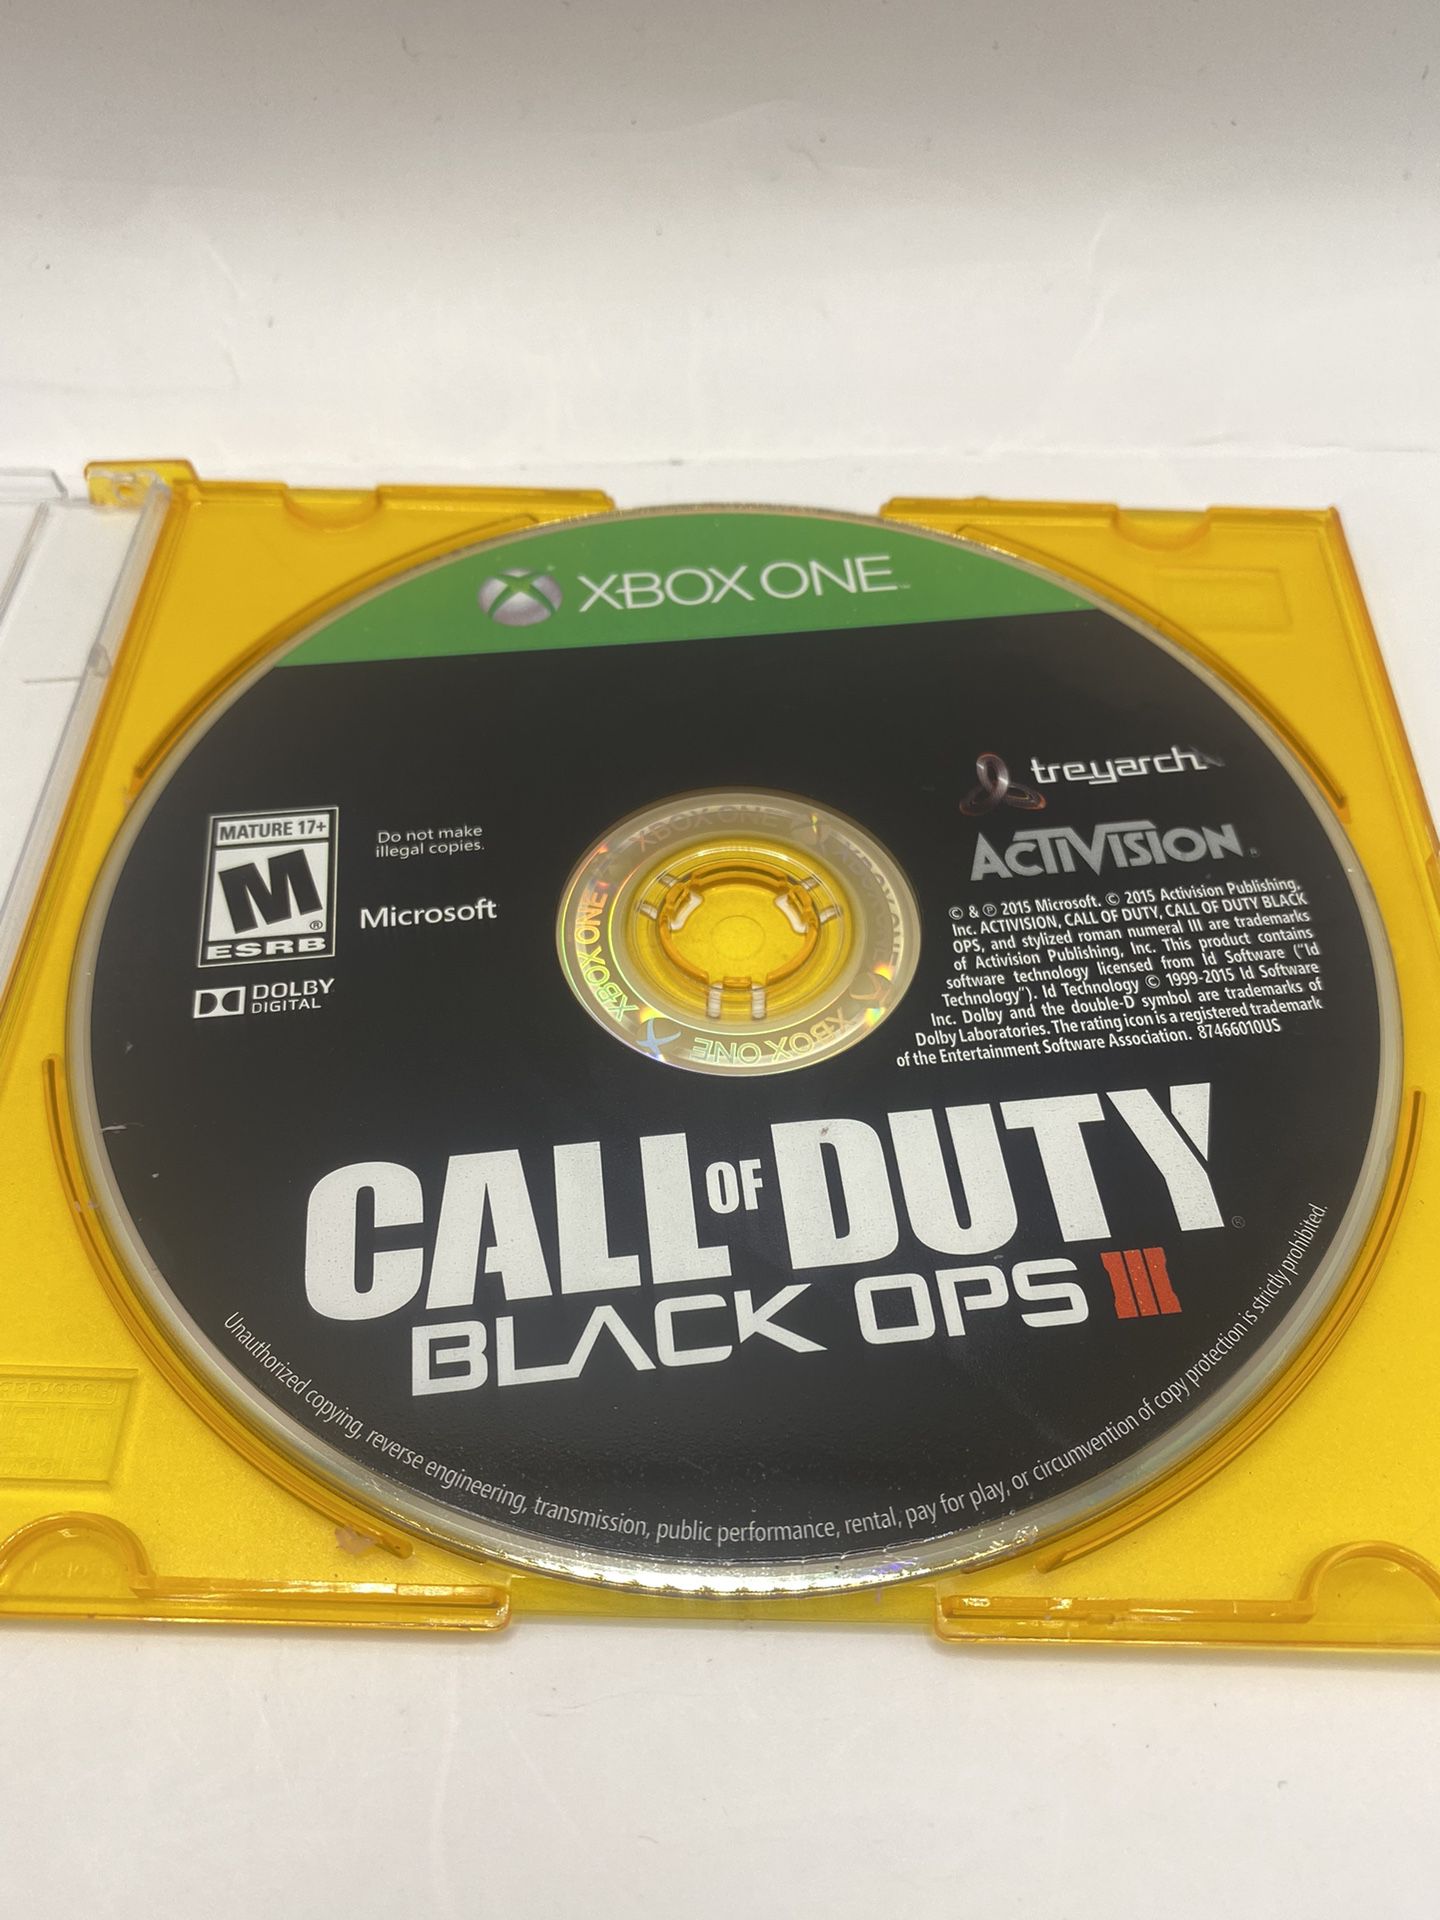 Call of Duty: Black Ops III 3 (Microsoft Xbox One, 2015) Disc Only Authentic BO3